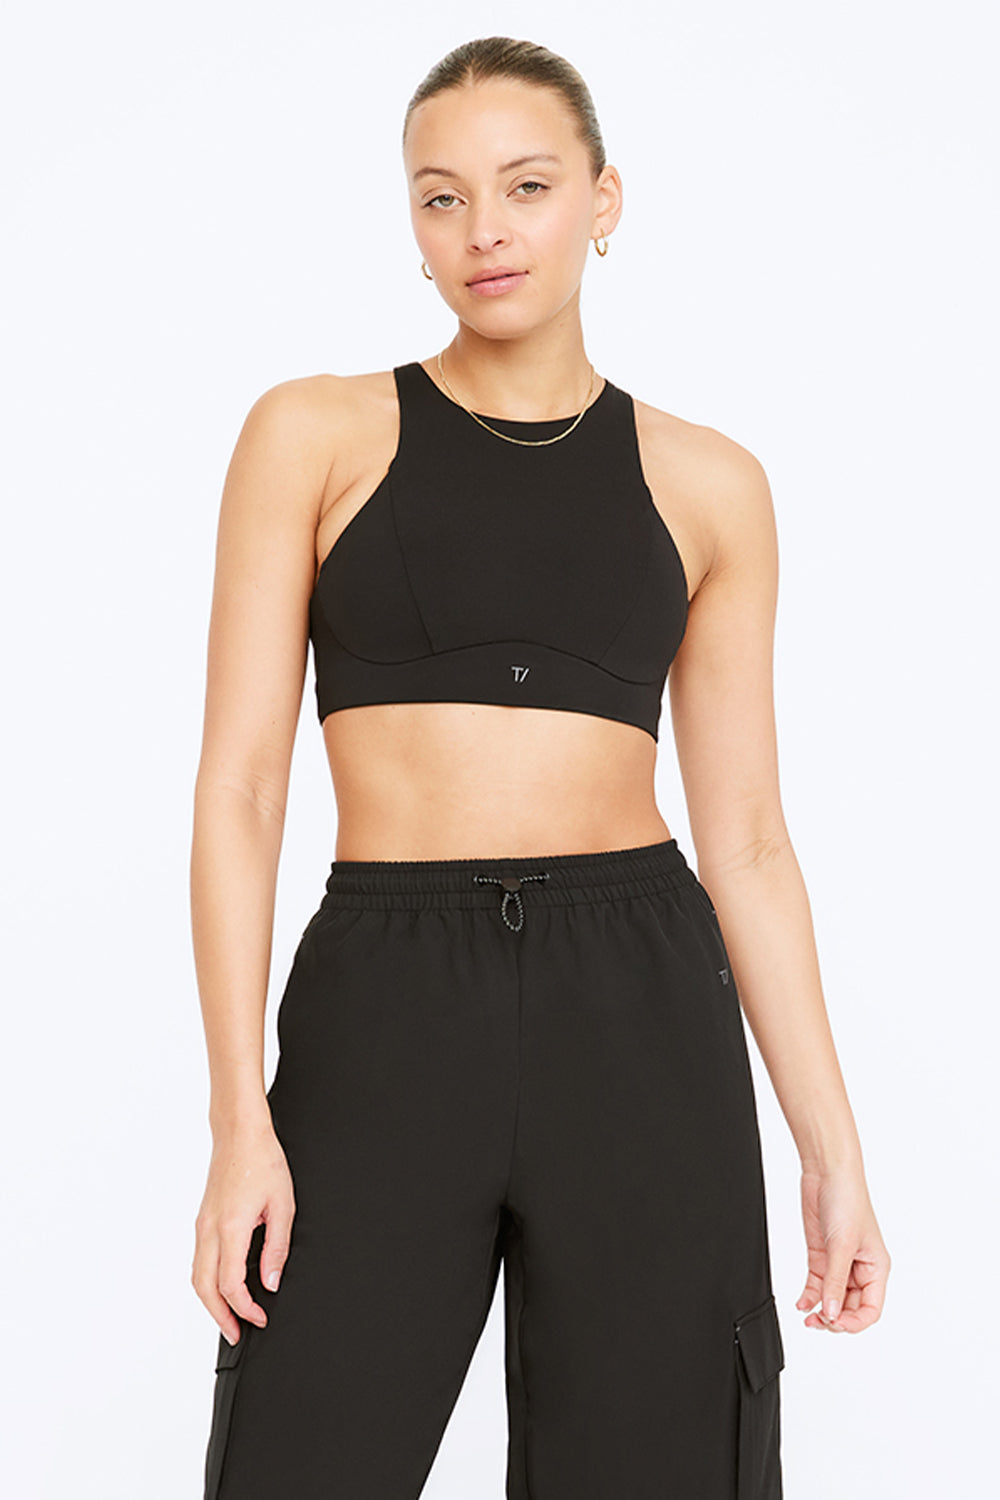 20 top TALA fitness clothing for eco-conscious consumers ideas in 2024